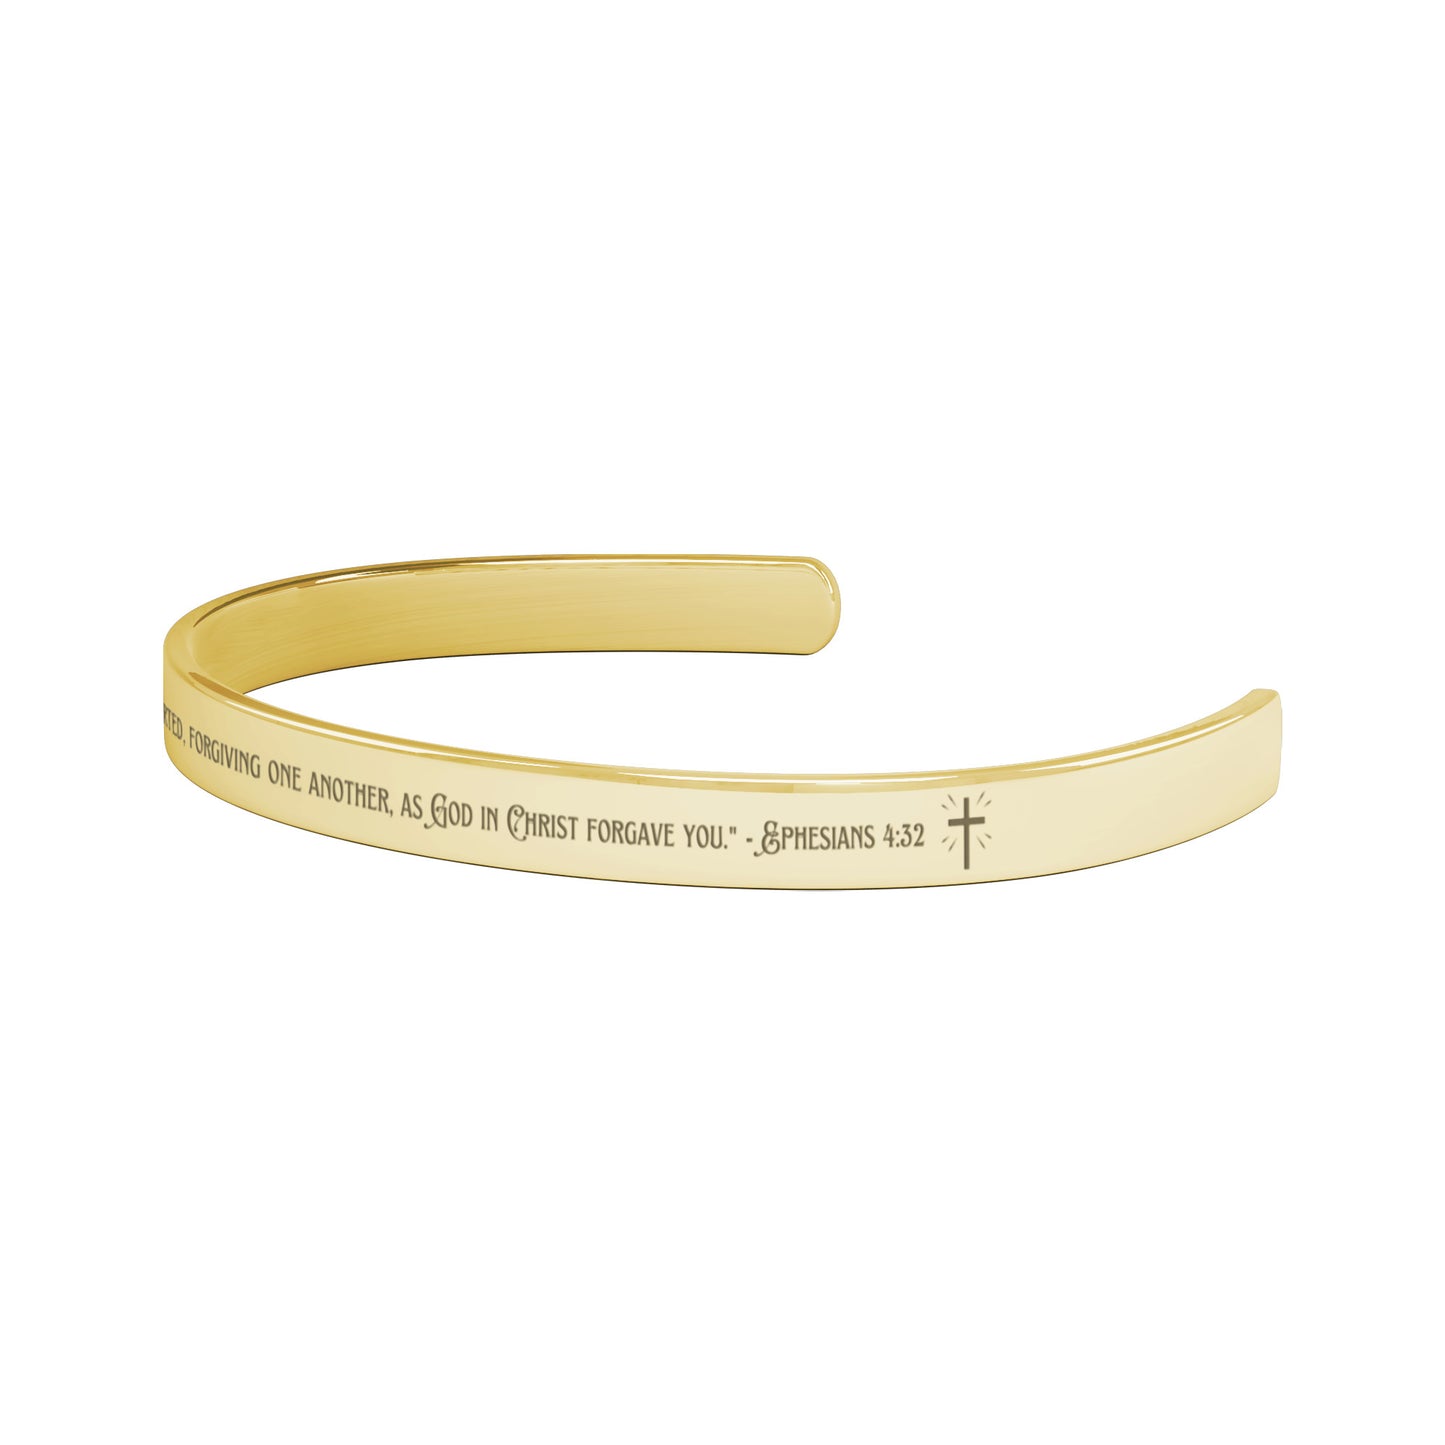 Be kind to one another - cuff bracelet